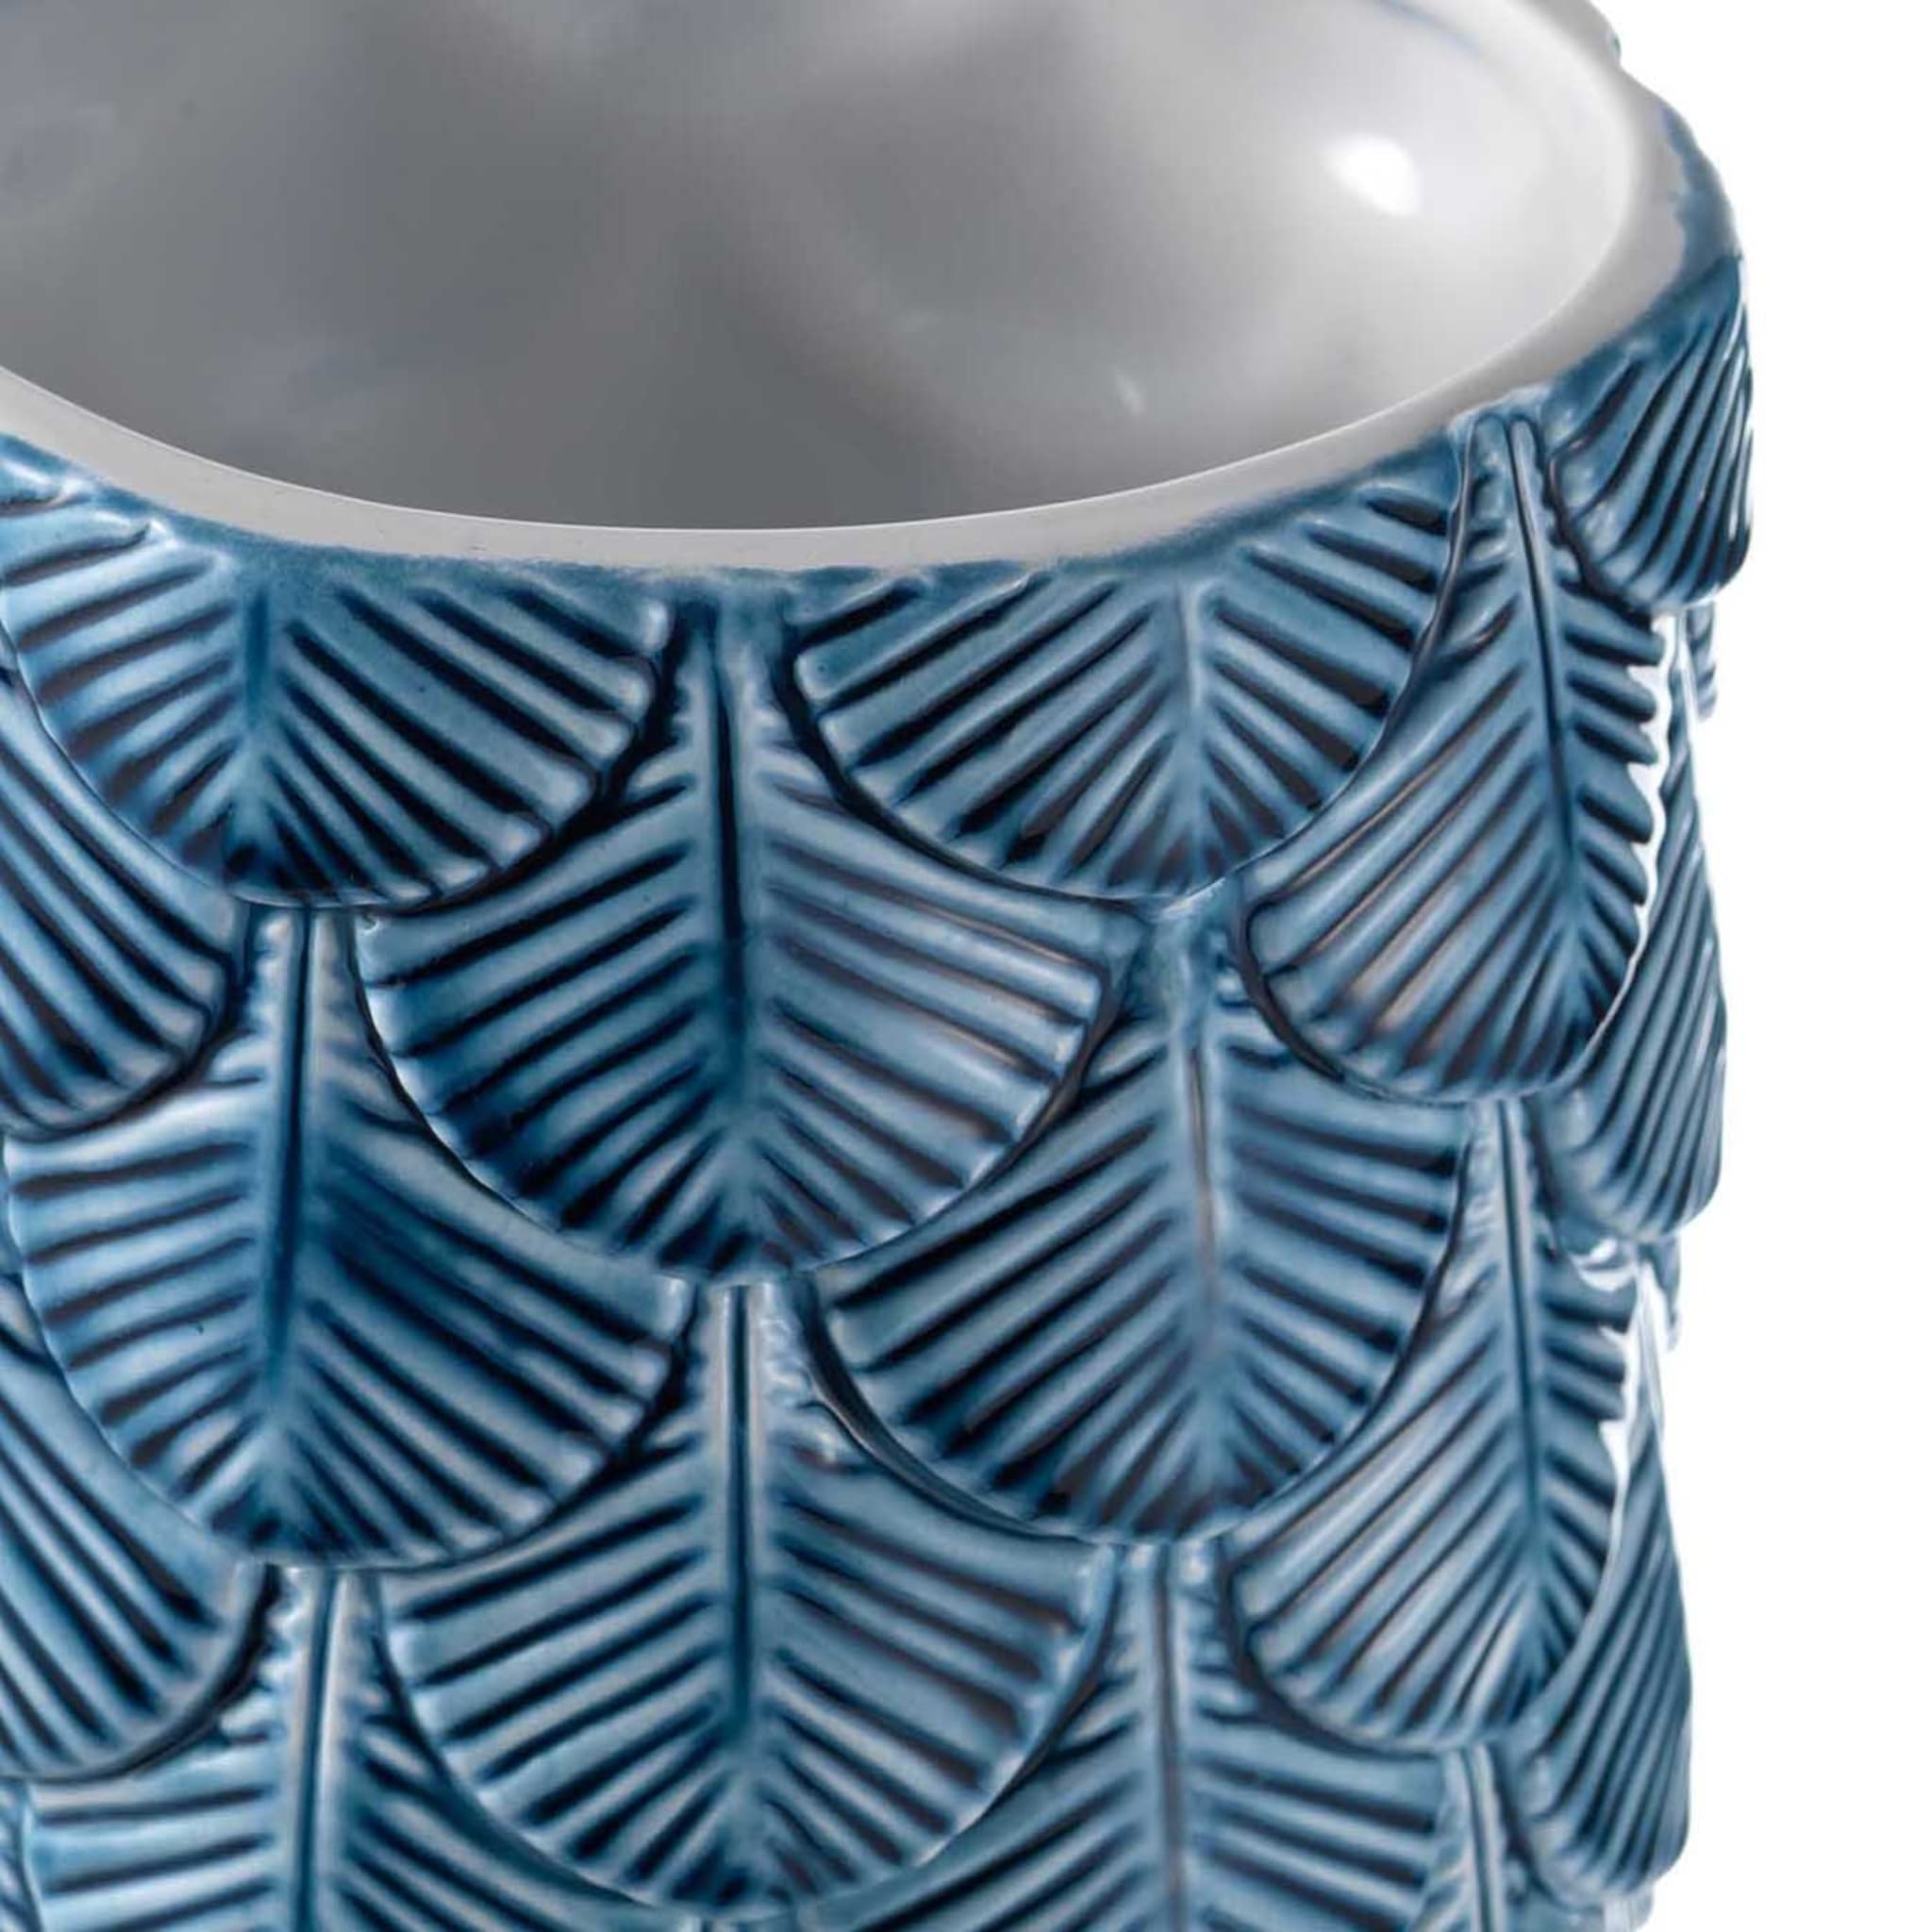 White and Blue Plumage Vase - Alternative view 1